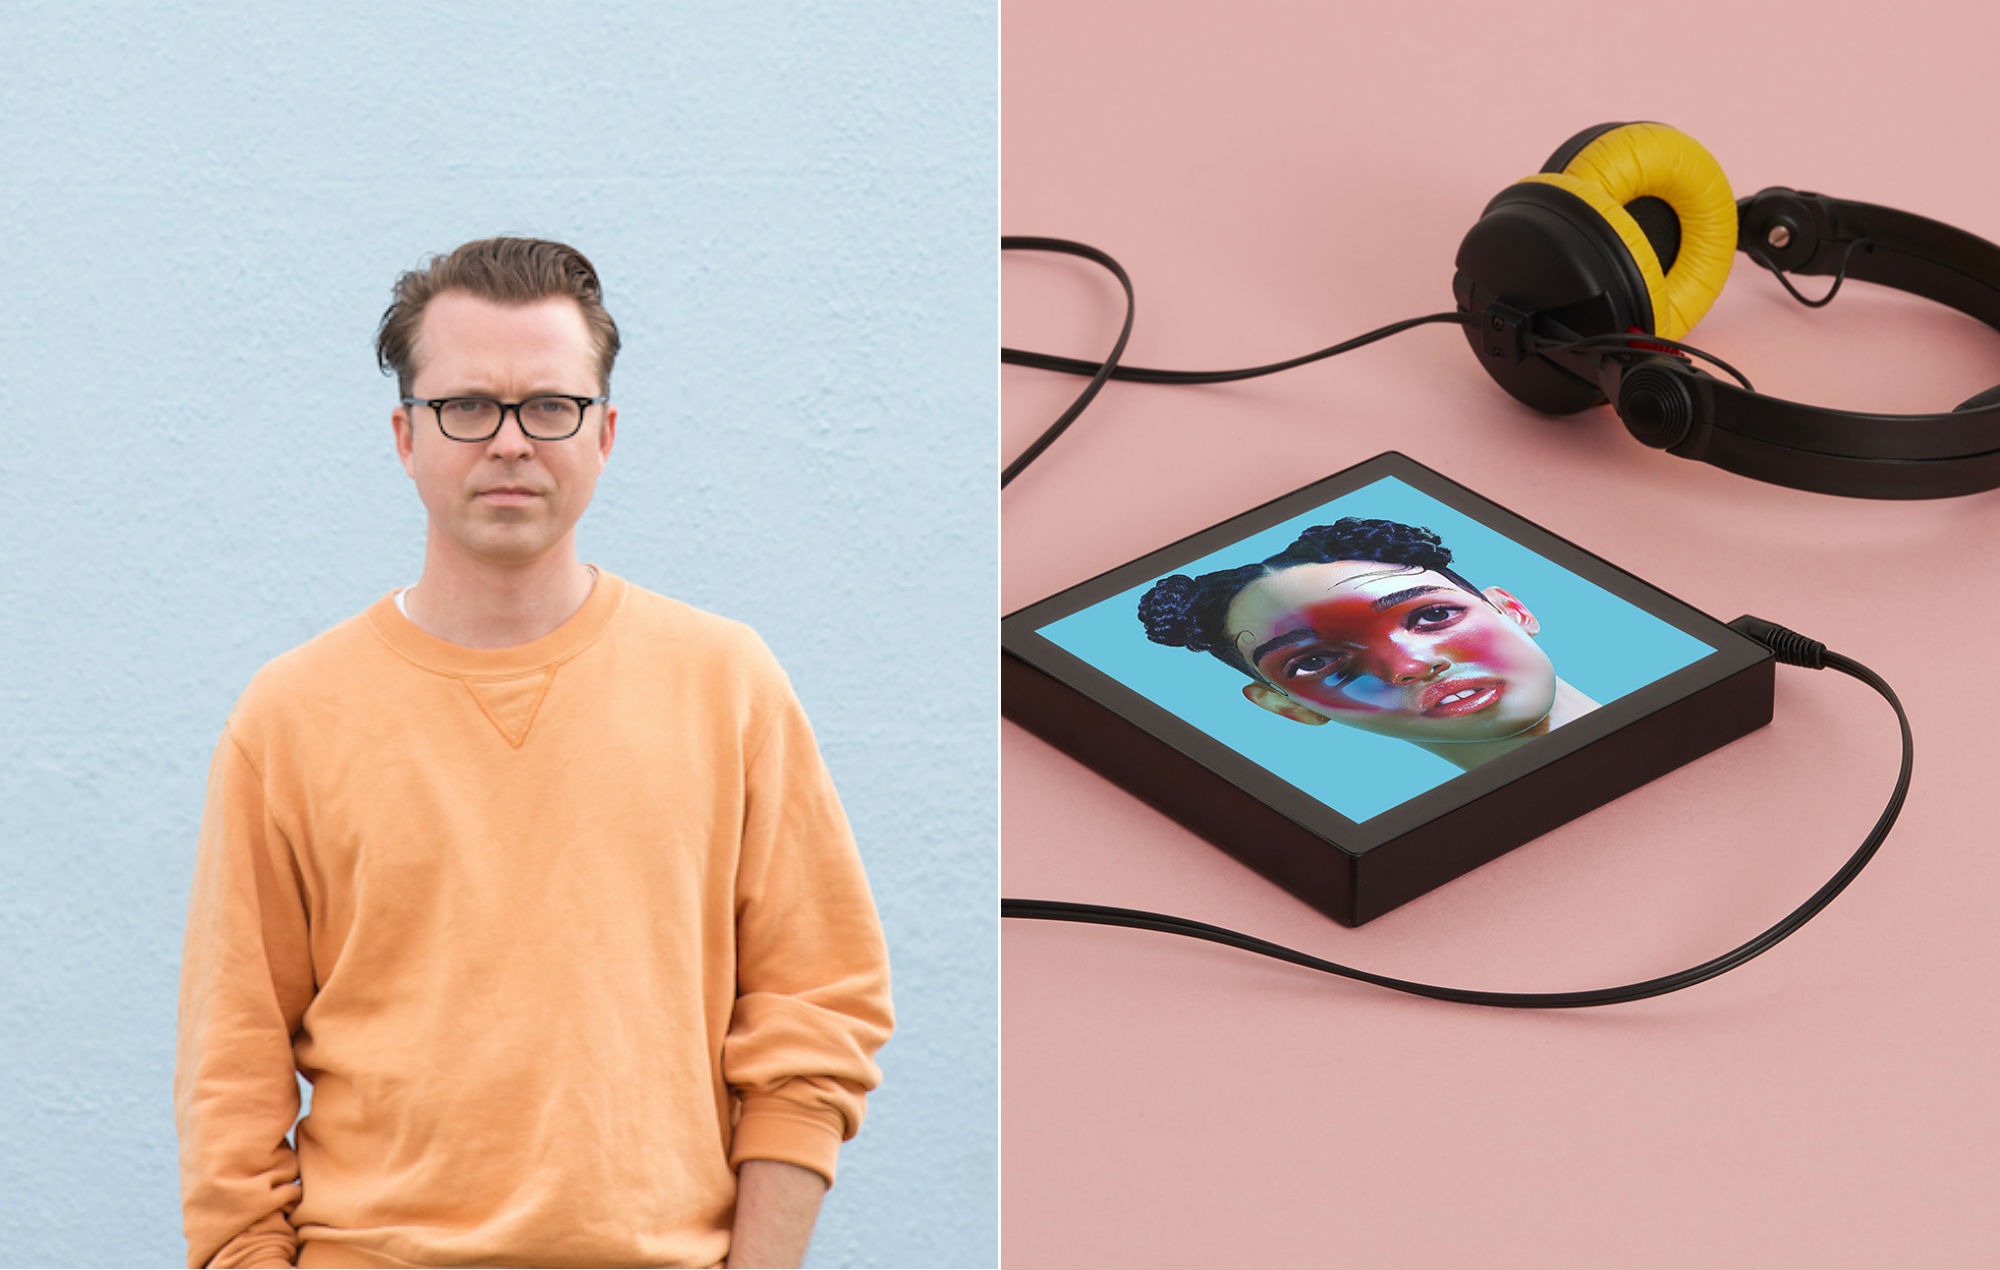 Tom Vek tells us about his surprise album ‘New Symbols’ and game-changing new music playing device